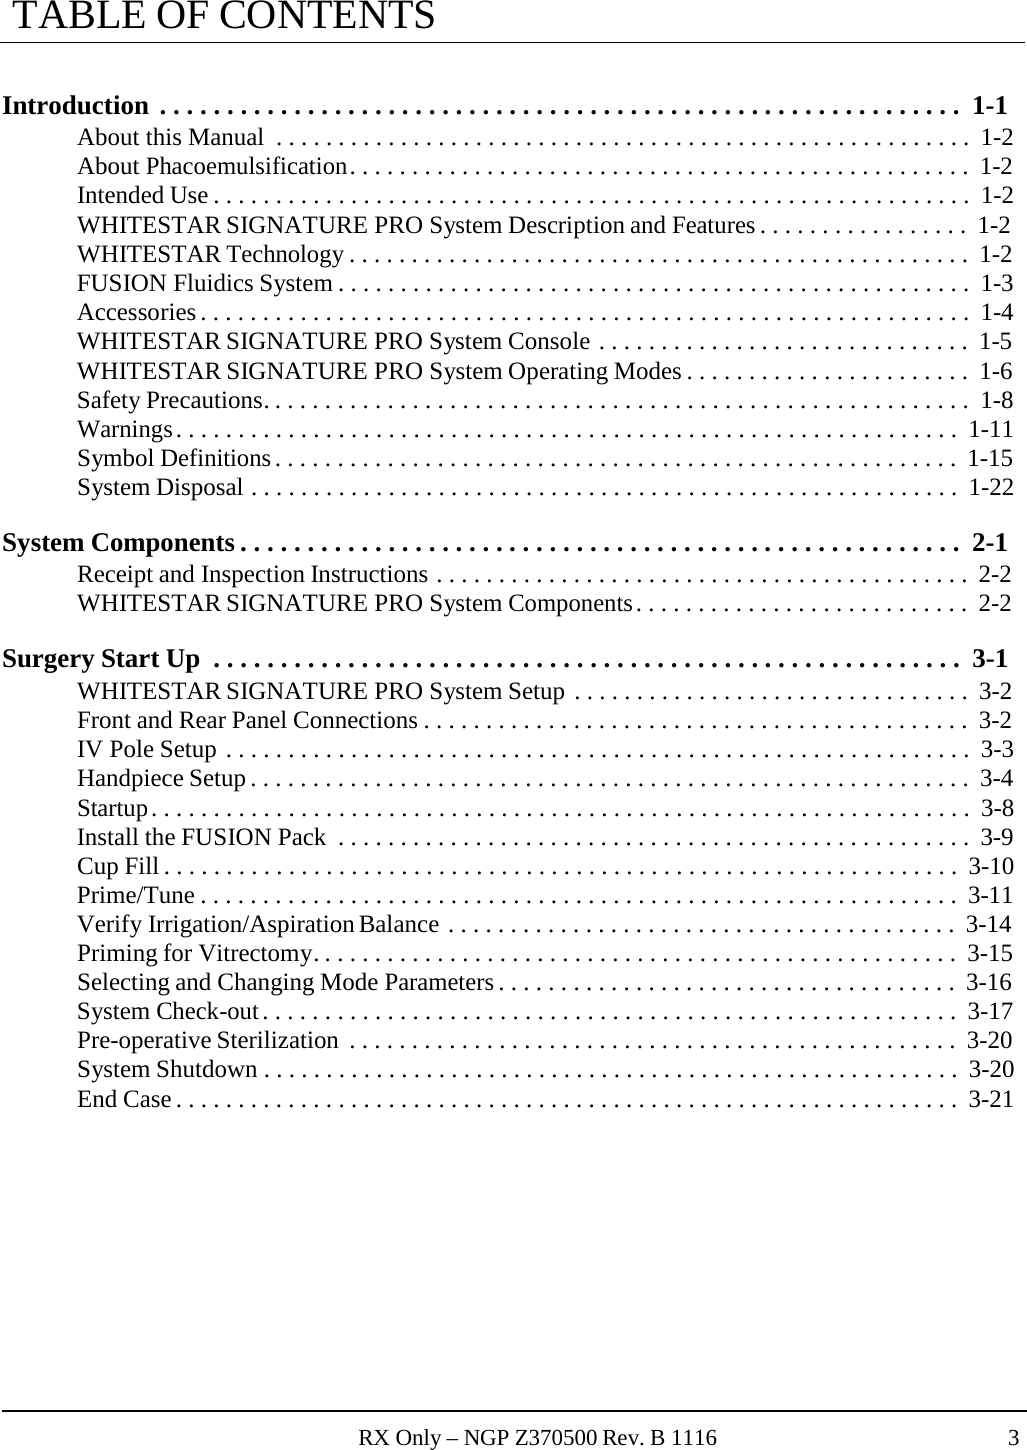 RX Only – NGP Z370500 Rev. B 1116 3  TABLE OF CONTENTS   Introduction . . . . . . . . . . . . . . . . . . . . . . . . . . . . . . . . . . . . . . . . . . . . . . . . . . . . . . . . . . . .  1-1 About this Manual  . . . . . . . . . . . . . . . . . . . . . . . . . . . . . . . . . . . . . . . . . . . . . . . . . . . . . . . .  1-2 About Phacoemulsification . . . . . . . . . . . . . . . . . . . . . . . . . . . . . . . . . . . . . . . . . . . . . . . . . .  1-2 Intended Use . . . . . . . . . . . . . . . . . . . . . . . . . . . . . . . . . . . . . . . . . . . . . . . . . . . . . . . . . . . . .  1-2 WHITESTAR SIGNATURE PRO System Description and Features . . . . . . . . . . . . . . . . .  1-2 WHITESTAR Technology . . . . . . . . . . . . . . . . . . . . . . . . . . . . . . . . . . . . . . . . . . . . . . . . . .  1-2 FUSION Fluidics System . . . . . . . . . . . . . . . . . . . . . . . . . . . . . . . . . . . . . . . . . . . . . . . . . . .  1-3 Accessories . . . . . . . . . . . . . . . . . . . . . . . . . . . . . . . . . . . . . . . . . . . . . . . . . . . . . . . . . . . . . .  1-4 WHITESTAR SIGNATURE PRO System Console . . . . . . . . . . . . . . . . . . . . . . . . . . . . . .  1-5 WHITESTAR SIGNATURE PRO System Operating Modes . . . . . . . . . . . . . . . . . . . . . . .  1-6 Safety Precautions. . . . . . . . . . . . . . . . . . . . . . . . . . . . . . . . . . . . . . . . . . . . . . . . . . . . . . . . .  1-8 Warnings . . . . . . . . . . . . . . . . . . . . . . . . . . . . . . . . . . . . . . . . . . . . . . . . . . . . . . . . . . . . . . .  1-11 Symbol Definitions . . . . . . . . . . . . . . . . . . . . . . . . . . . . . . . . . . . . . . . . . . . . . . . . . . . . . . .  1-15 System Disposal . . . . . . . . . . . . . . . . . . . . . . . . . . . . . . . . . . . . . . . . . . . . . . . . . . . . . . . . .  1-22  System Components . . . . . . . . . . . . . . . . . . . . . . . . . . . . . . . . . . . . . . . . . . . . . . . . . . . . . .  2-1 Receipt and Inspection Instructions . . . . . . . . . . . . . . . . . . . . . . . . . . . . . . . . . . . . . . . . . . .  2-2 WHITESTAR SIGNATURE PRO System Components . . . . . . . . . . . . . . . . . . . . . . . . . . .  2-2  Surgery Start Up  . . . . . . . . . . . . . . . . . . . . . . . . . . . . . . . . . . . . . . . . . . . . . . . . . . . . . . . .  3-1 WHITESTAR SIGNATURE PRO System Setup . . . . . . . . . . . . . . . . . . . . . . . . . . . . . . . .  3-2 Front and Rear Panel Connections . . . . . . . . . . . . . . . . . . . . . . . . . . . . . . . . . . . . . . . . . . . .  3-2 IV Pole Setup . . . . . . . . . . . . . . . . . . . . . . . . . . . . . . . . . . . . . . . . . . . . . . . . . . . . . . . . . . . .  3-3 Handpiece Setup . . . . . . . . . . . . . . . . . . . . . . . . . . . . . . . . . . . . . . . . . . . . . . . . . . . . . . . . . .  3-4 Startup . . . . . . . . . . . . . . . . . . . . . . . . . . . . . . . . . . . . . . . . . . . . . . . . . . . . . . . . . . . . . . . . . .  3-8 Install the FUSION Pack  . . . . . . . . . . . . . . . . . . . . . . . . . . . . . . . . . . . . . . . . . . . . . . . . . . .  3-9 Cup Fill . . . . . . . . . . . . . . . . . . . . . . . . . . . . . . . . . . . . . . . . . . . . . . . . . . . . . . . . . . . . . . . .  3-10 Prime/Tune . . . . . . . . . . . . . . . . . . . . . . . . . . . . . . . . . . . . . . . . . . . . . . . . . . . . . . . . . . . . .  3-11 Verify Irrigation/Aspiration Balance . . . . . . . . . . . . . . . . . . . . . . . . . . . . . . . . . . . . . . . . .  3-14 Priming for Vitrectomy. . . . . . . . . . . . . . . . . . . . . . . . . . . . . . . . . . . . . . . . . . . . . . . . . . . .  3-15 Selecting and Changing Mode Parameters . . . . . . . . . . . . . . . . . . . . . . . . . . . . . . . . . . . . .  3-16 System Check-out . . . . . . . . . . . . . . . . . . . . . . . . . . . . . . . . . . . . . . . . . . . . . . . . . . . . . . . .  3-17 Pre-operative Sterilization  . . . . . . . . . . . . . . . . . . . . . . . . . . . . . . . . . . . . . . . . . . . . . . . . .  3-20 System Shutdown . . . . . . . . . . . . . . . . . . . . . . . . . . . . . . . . . . . . . . . . . . . . . . . . . . . . . . . .  3-20 End Case . . . . . . . . . . . . . . . . . . . . . . . . . . . . . . . . . . . . . . . . . . . . . . . . . . . . . . . . . . . . . . .  3-21 